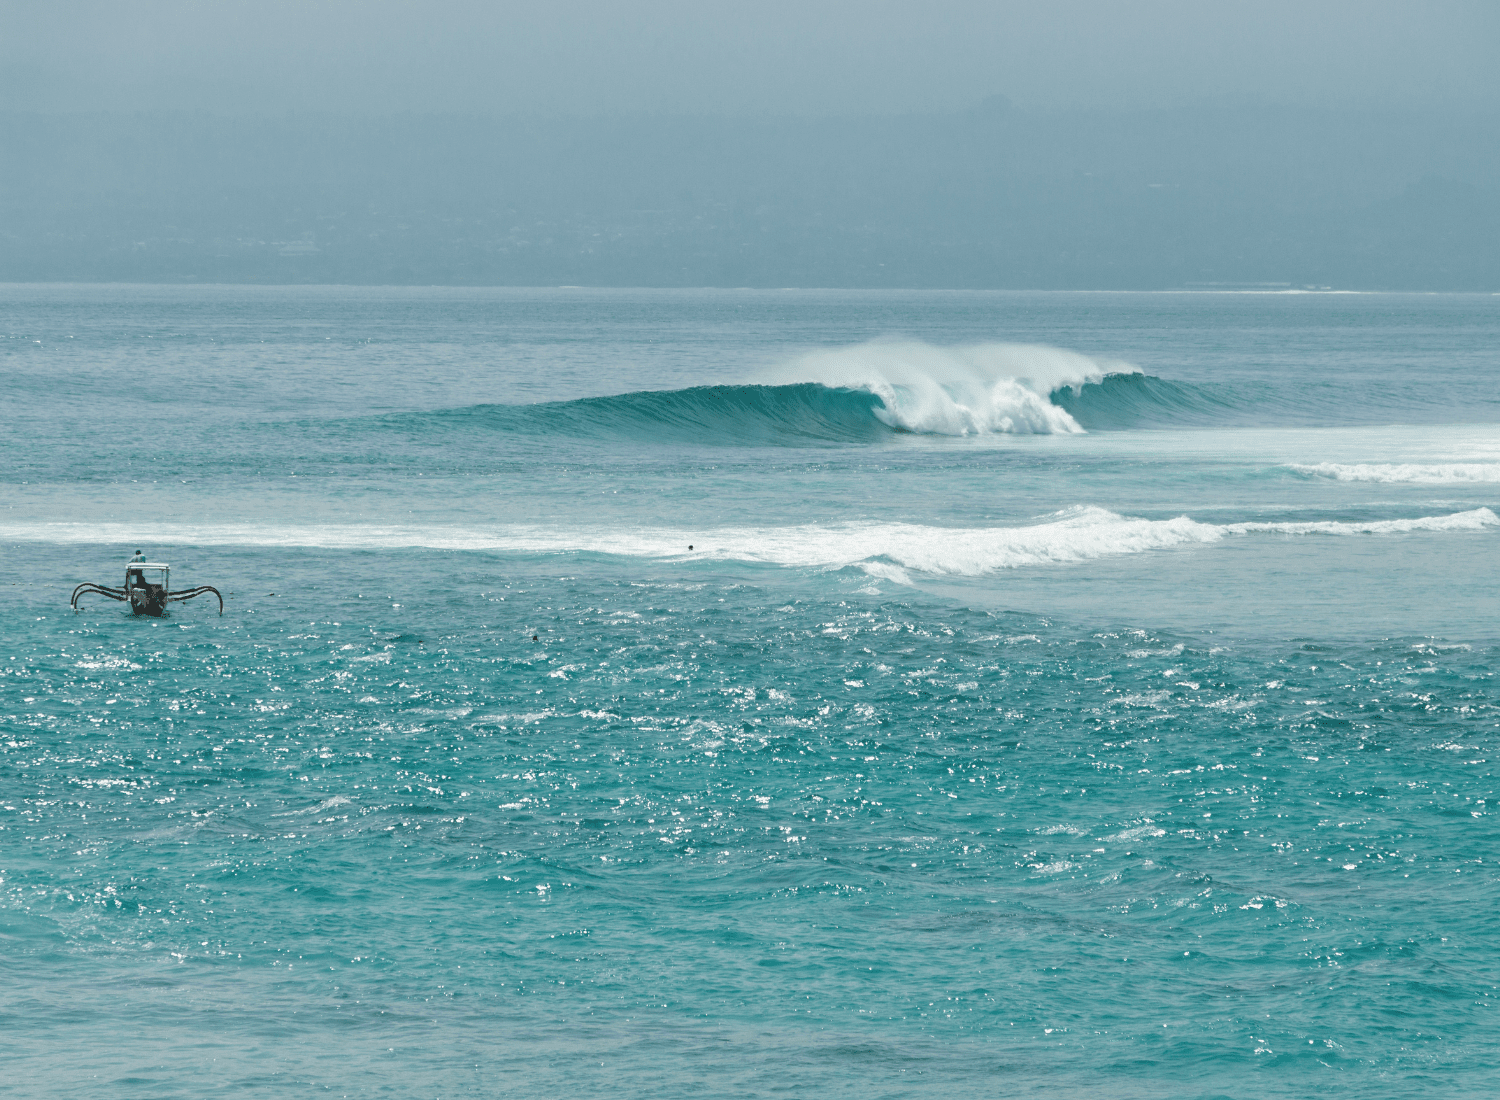 A first timer's guide to surfing Nusa Lembongan - 4 best surf spots for all levels